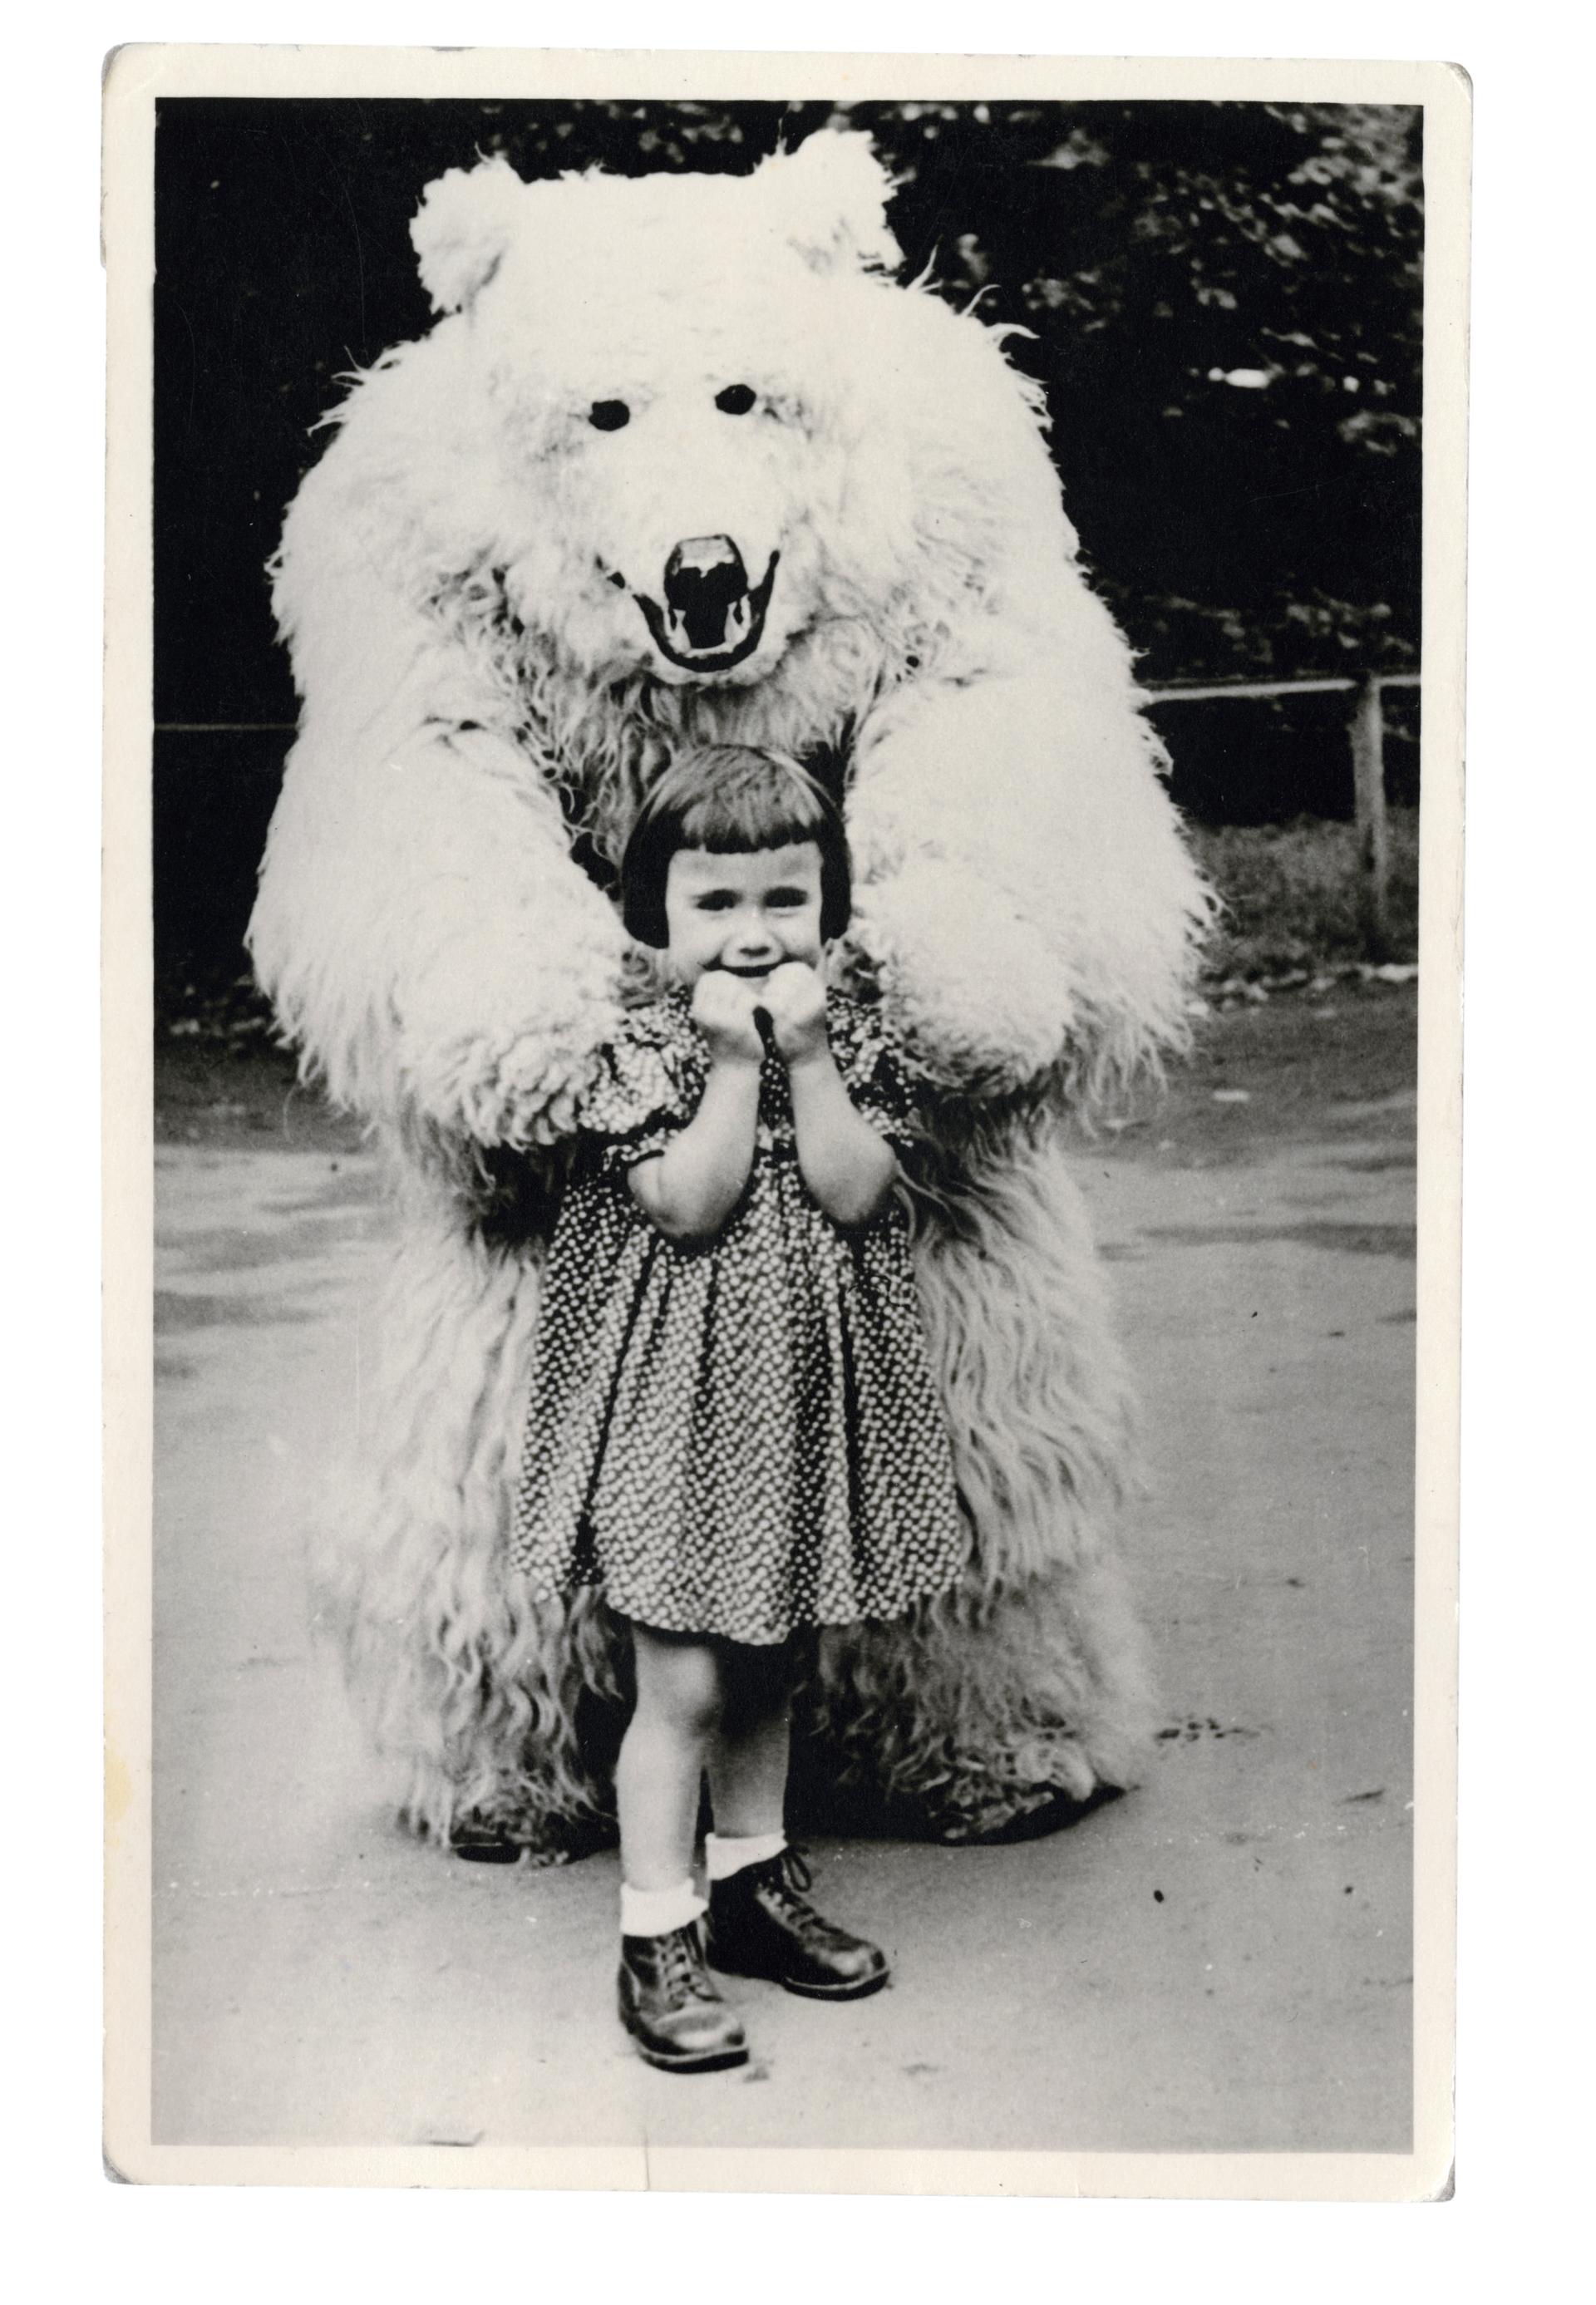 A young German girl stands with a man in a polar bear costume